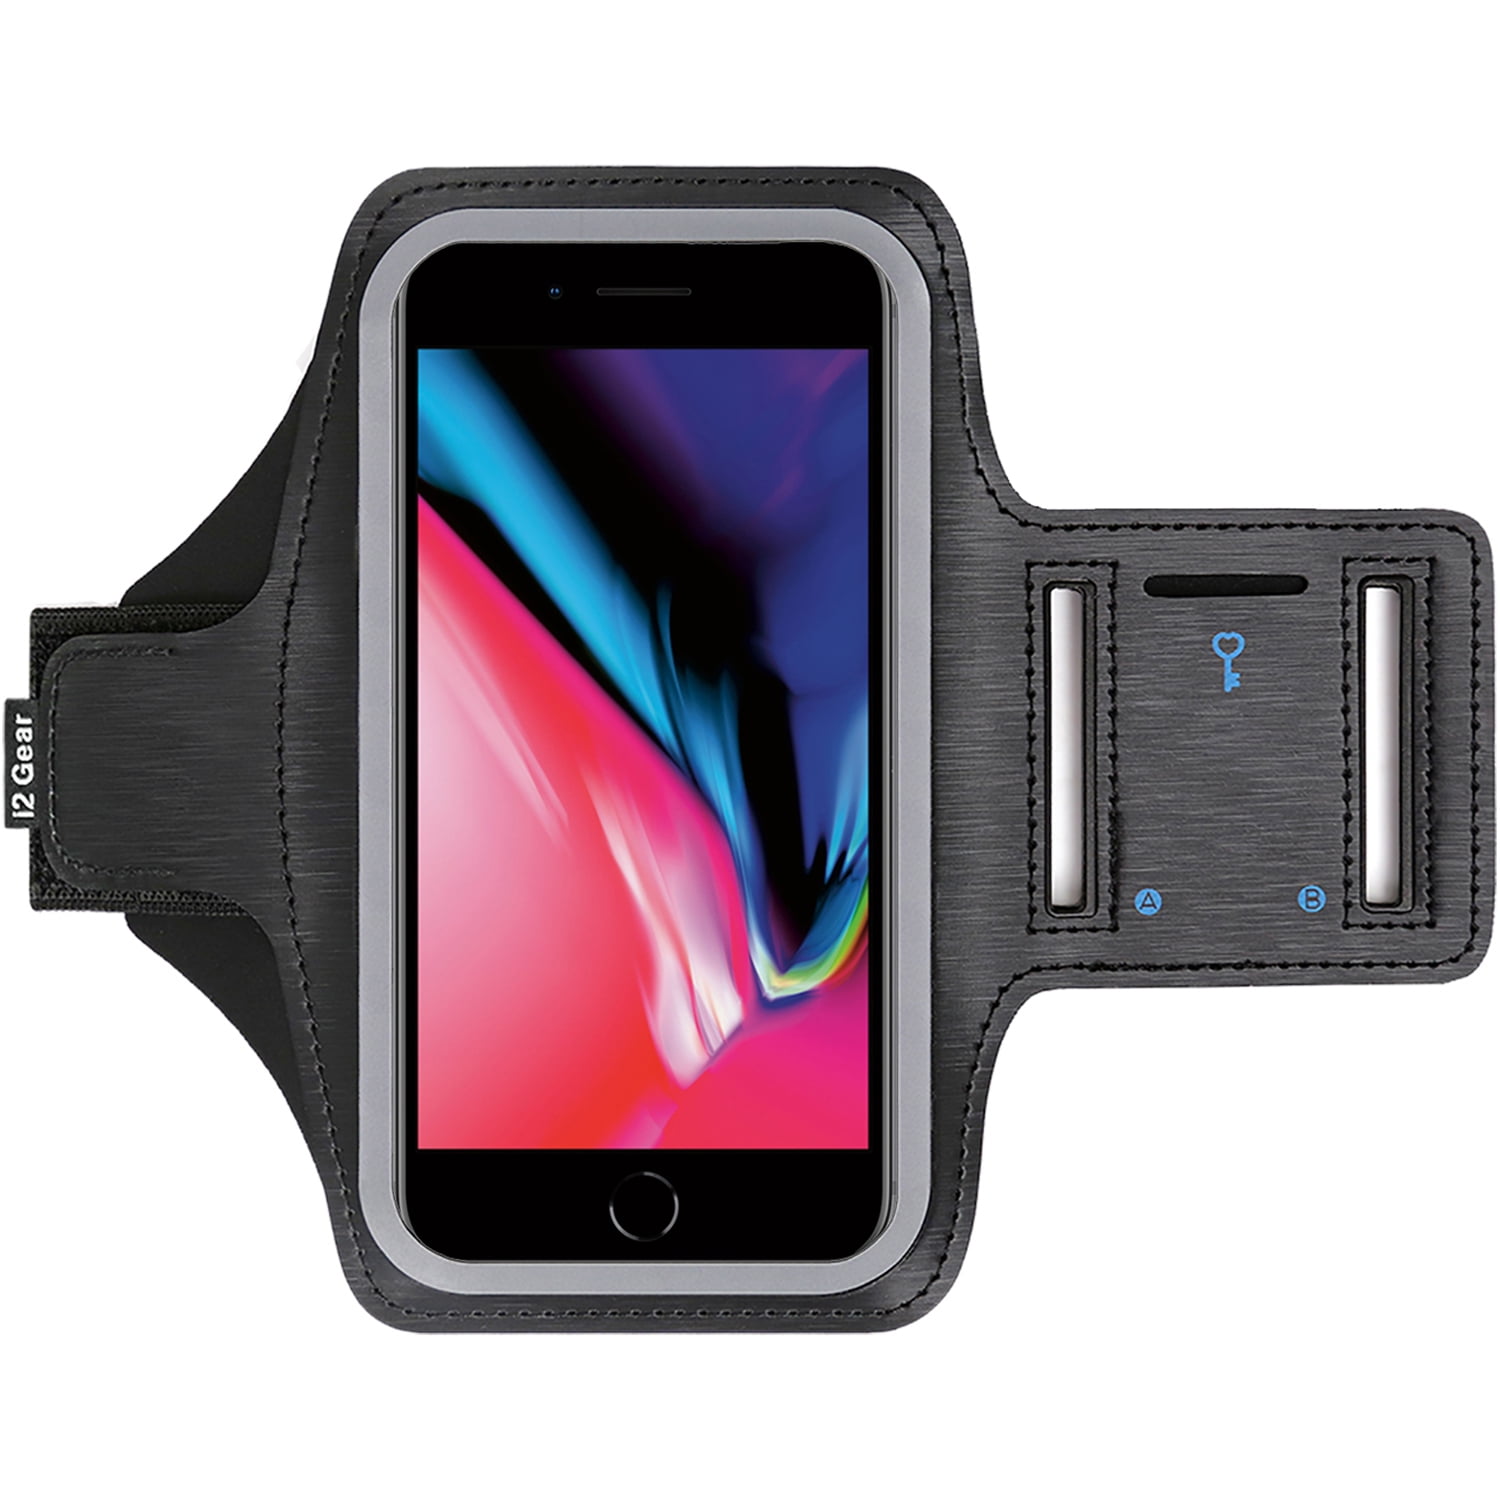 Perfect Earphone Connection while Workout Running Sports Armband with Key holder Slot for Apple iPhone 8 Running Armband J&D Armband Compatible for iPhone 8/iPhone 7/iPhone 6/iPhone 6s Armband 